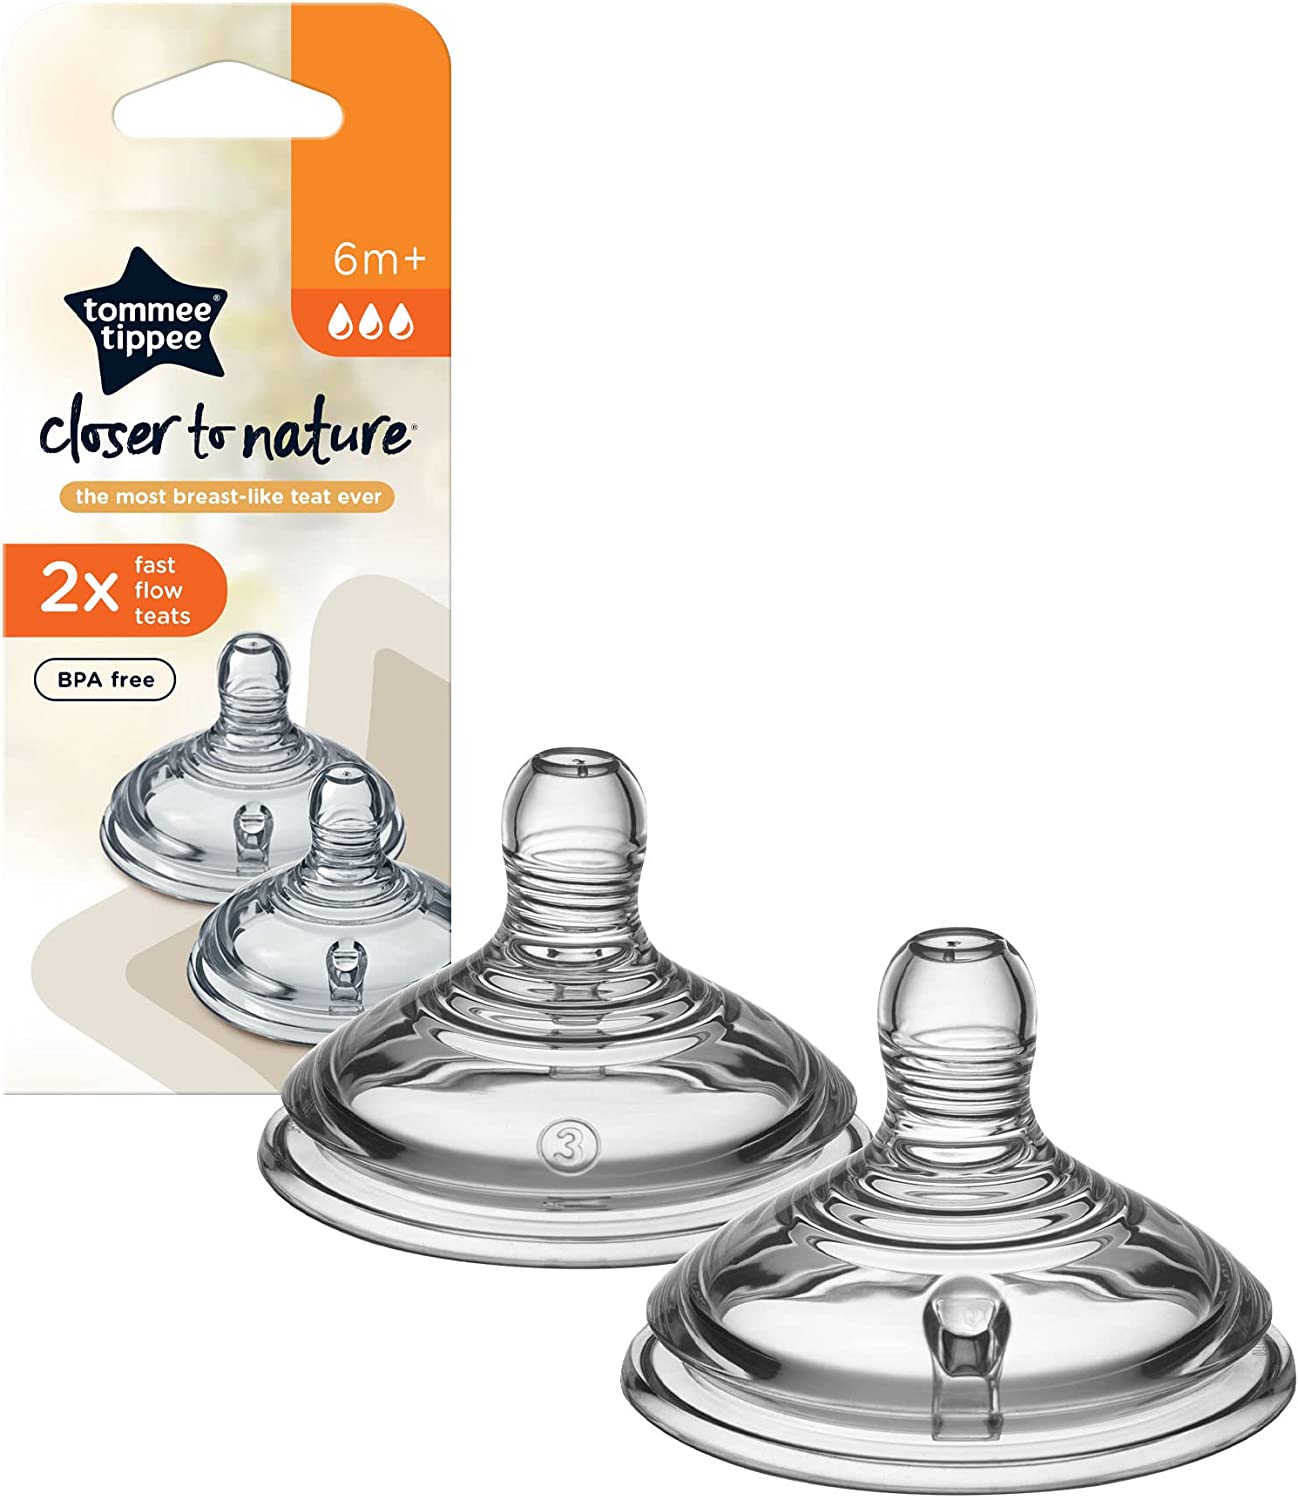 Tommee Tippee Closer to Nature Baby Fast Flow Bottle Teats Pack of 2